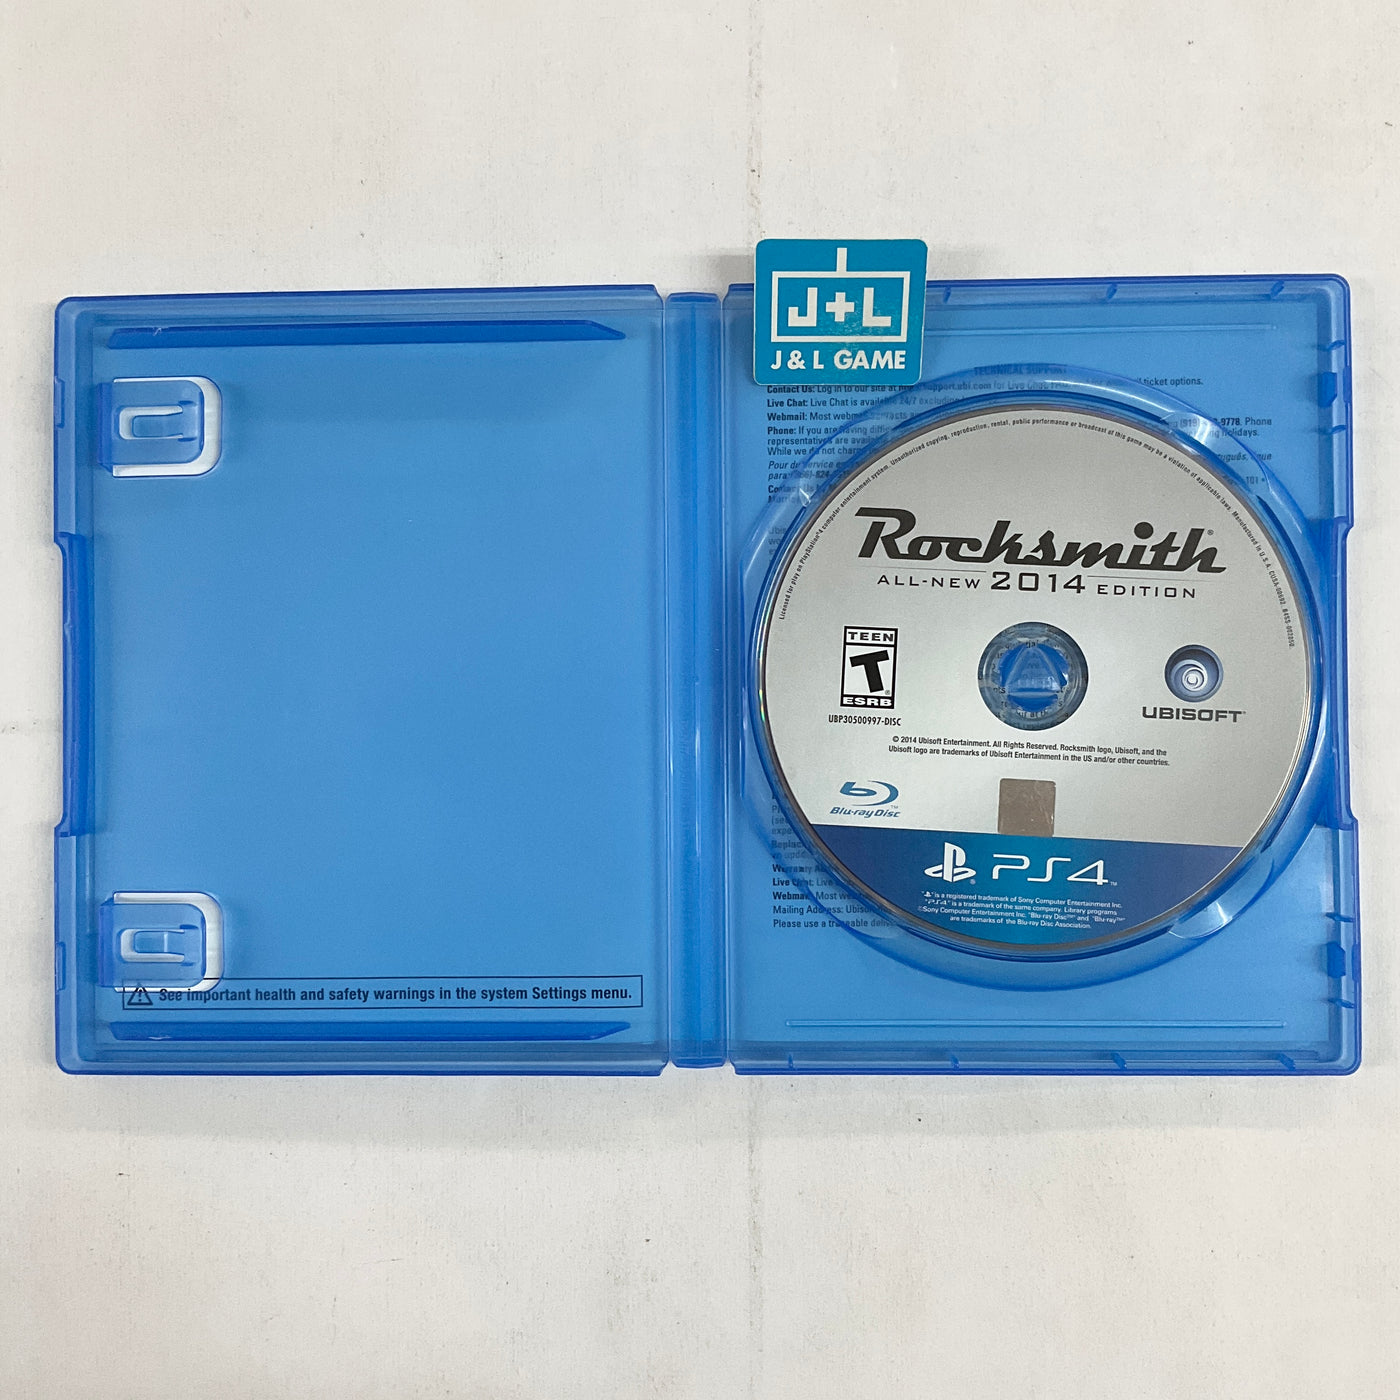 Rocksmith 2014 Edition Remastered Playstation 4 with Cable